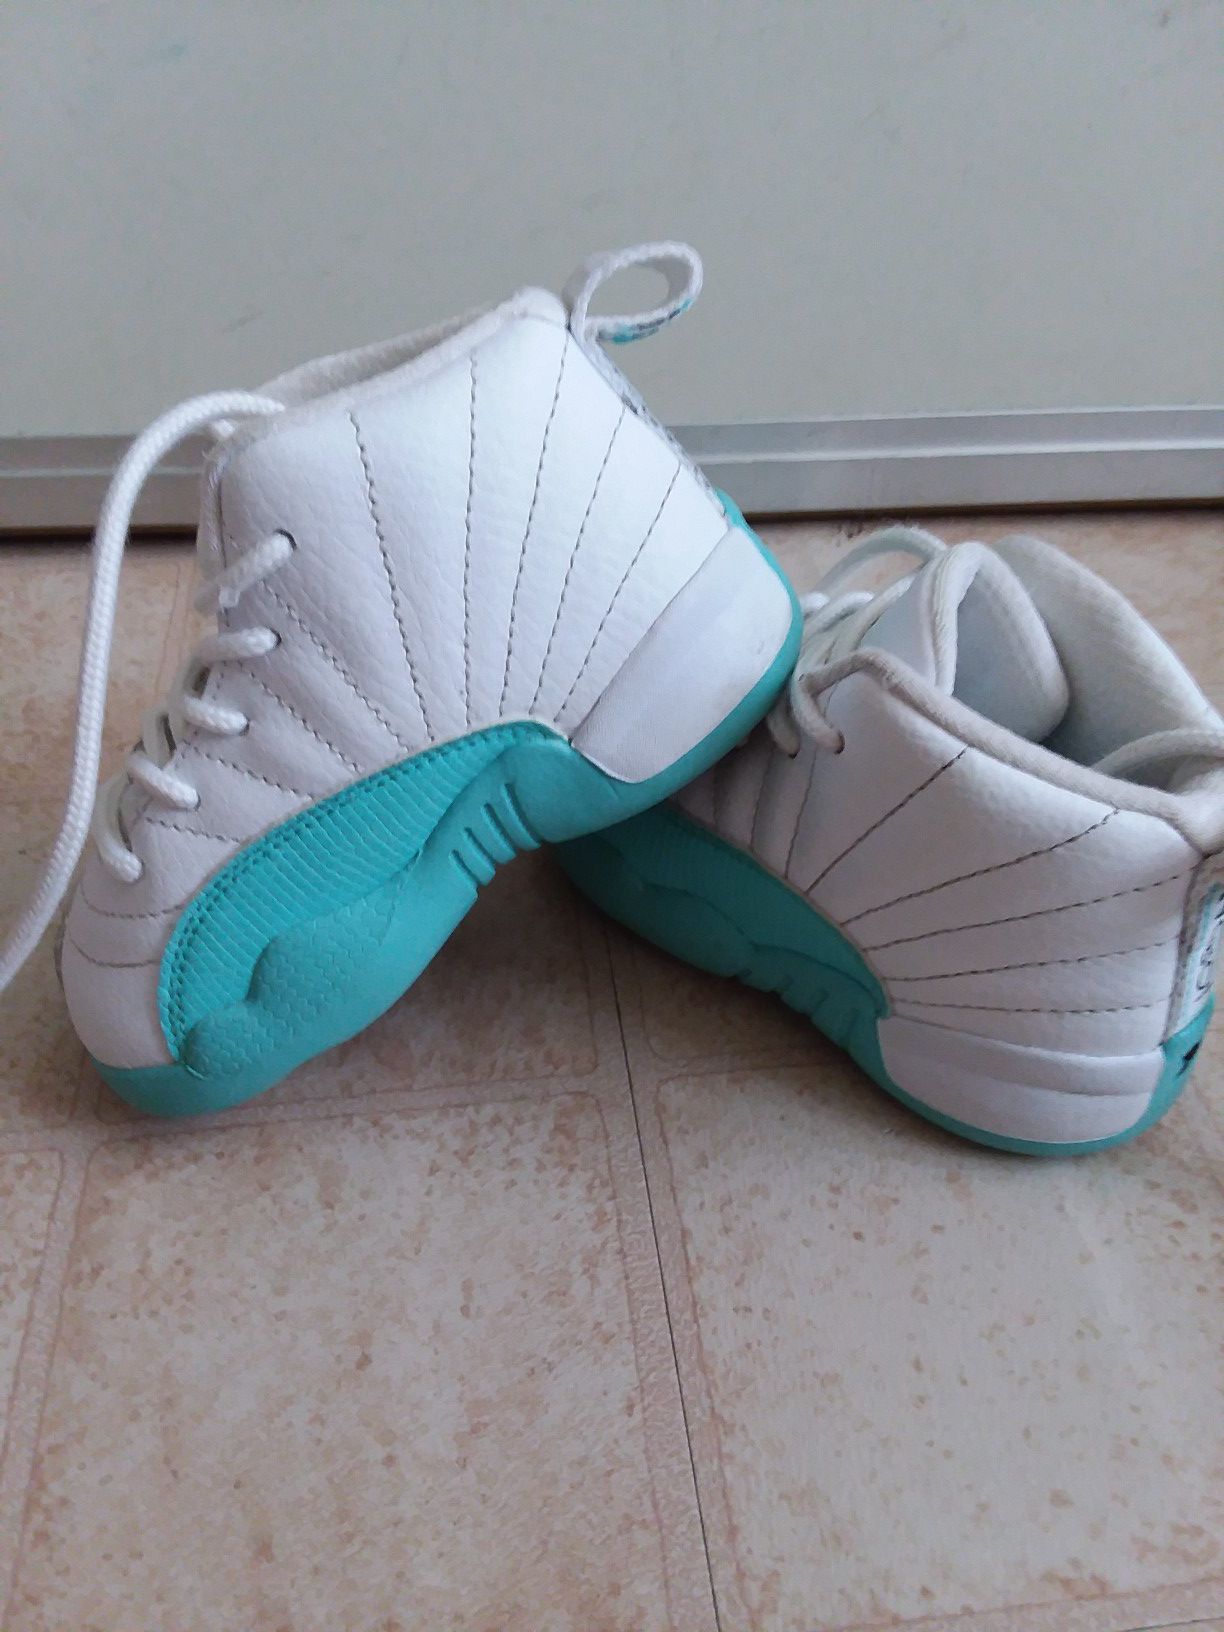 Jordan 12 Retro Sneakers 819666-100 Toddler Girls 6C Shoes White Aqua Youth Kids. Condition is Pre-owned.